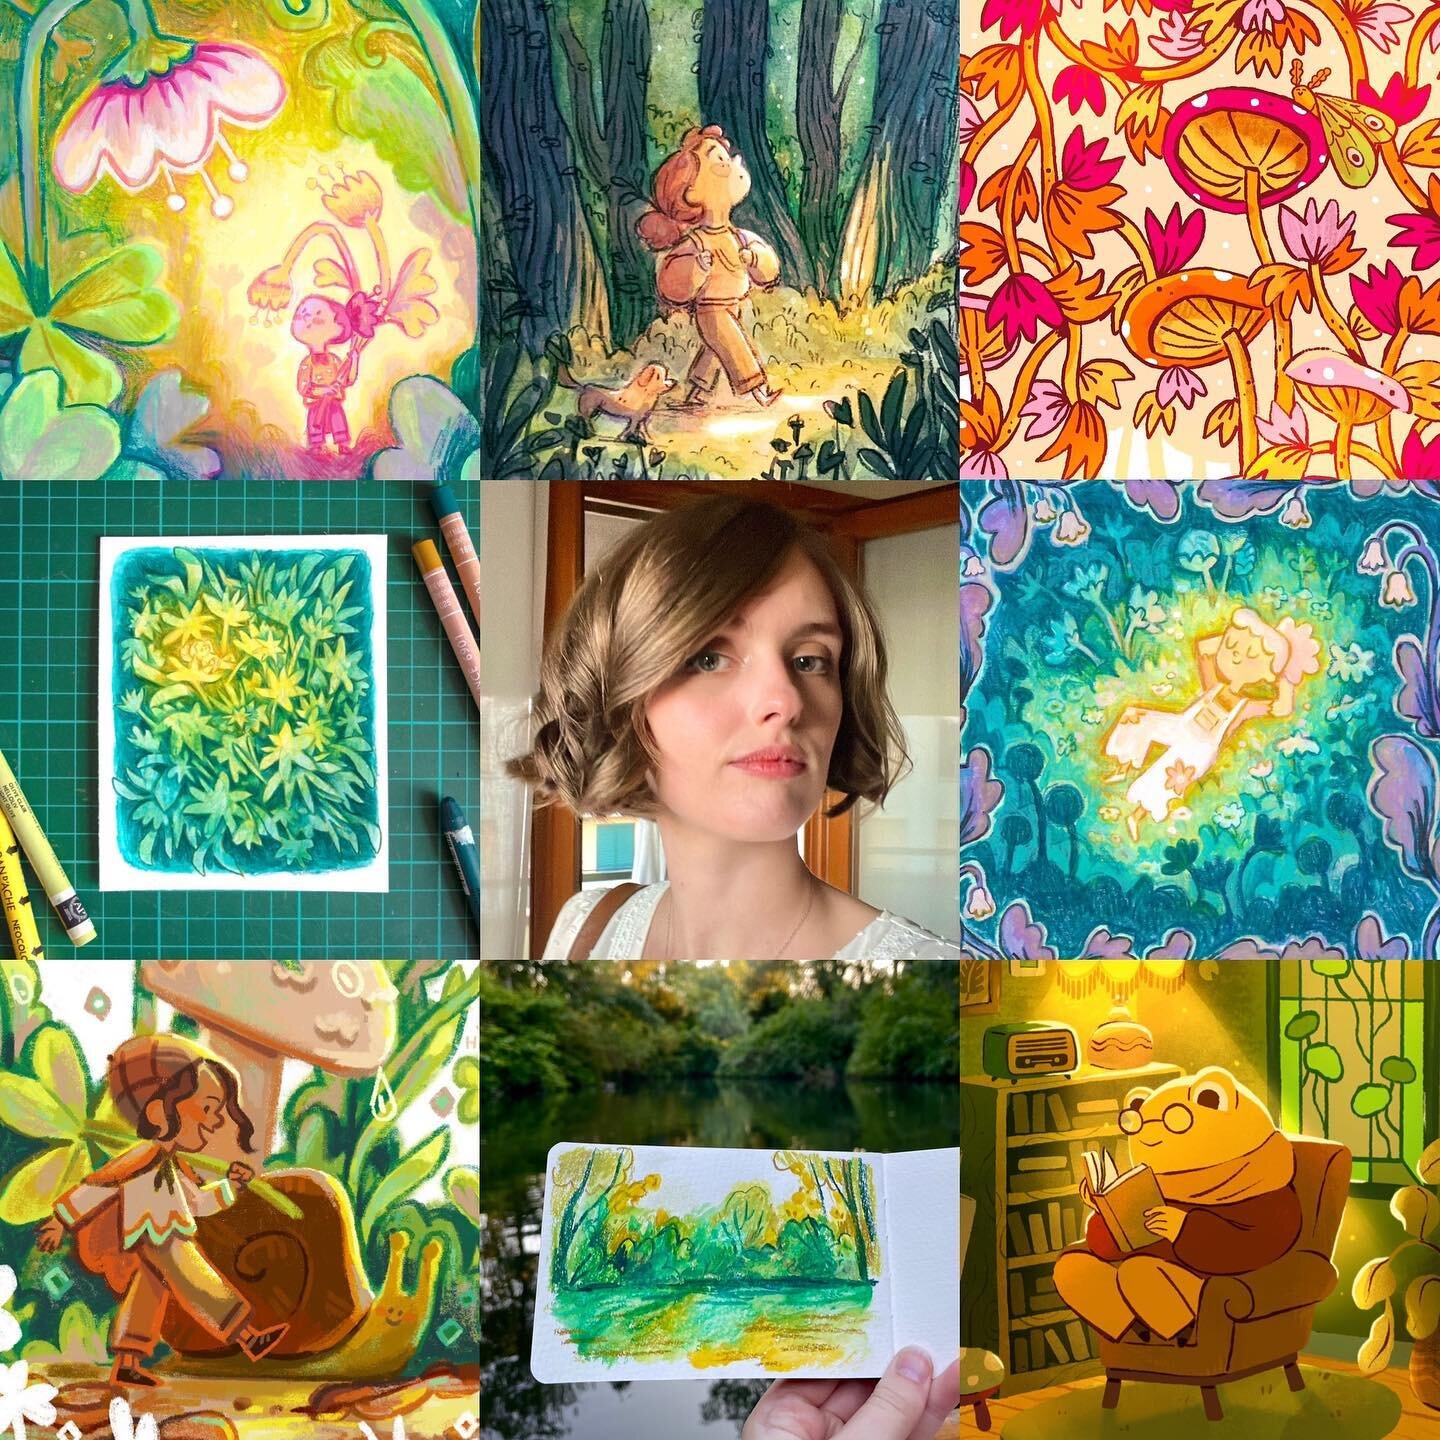 #artvsartist time! 🧡

It&rsquo;s always nice to spend a bit of time collating and reflecting on what I made over the year - here are a few of my favourites above.

This year I gave much less importance to sticking to a &ldquo;style&rdquo; and spent 